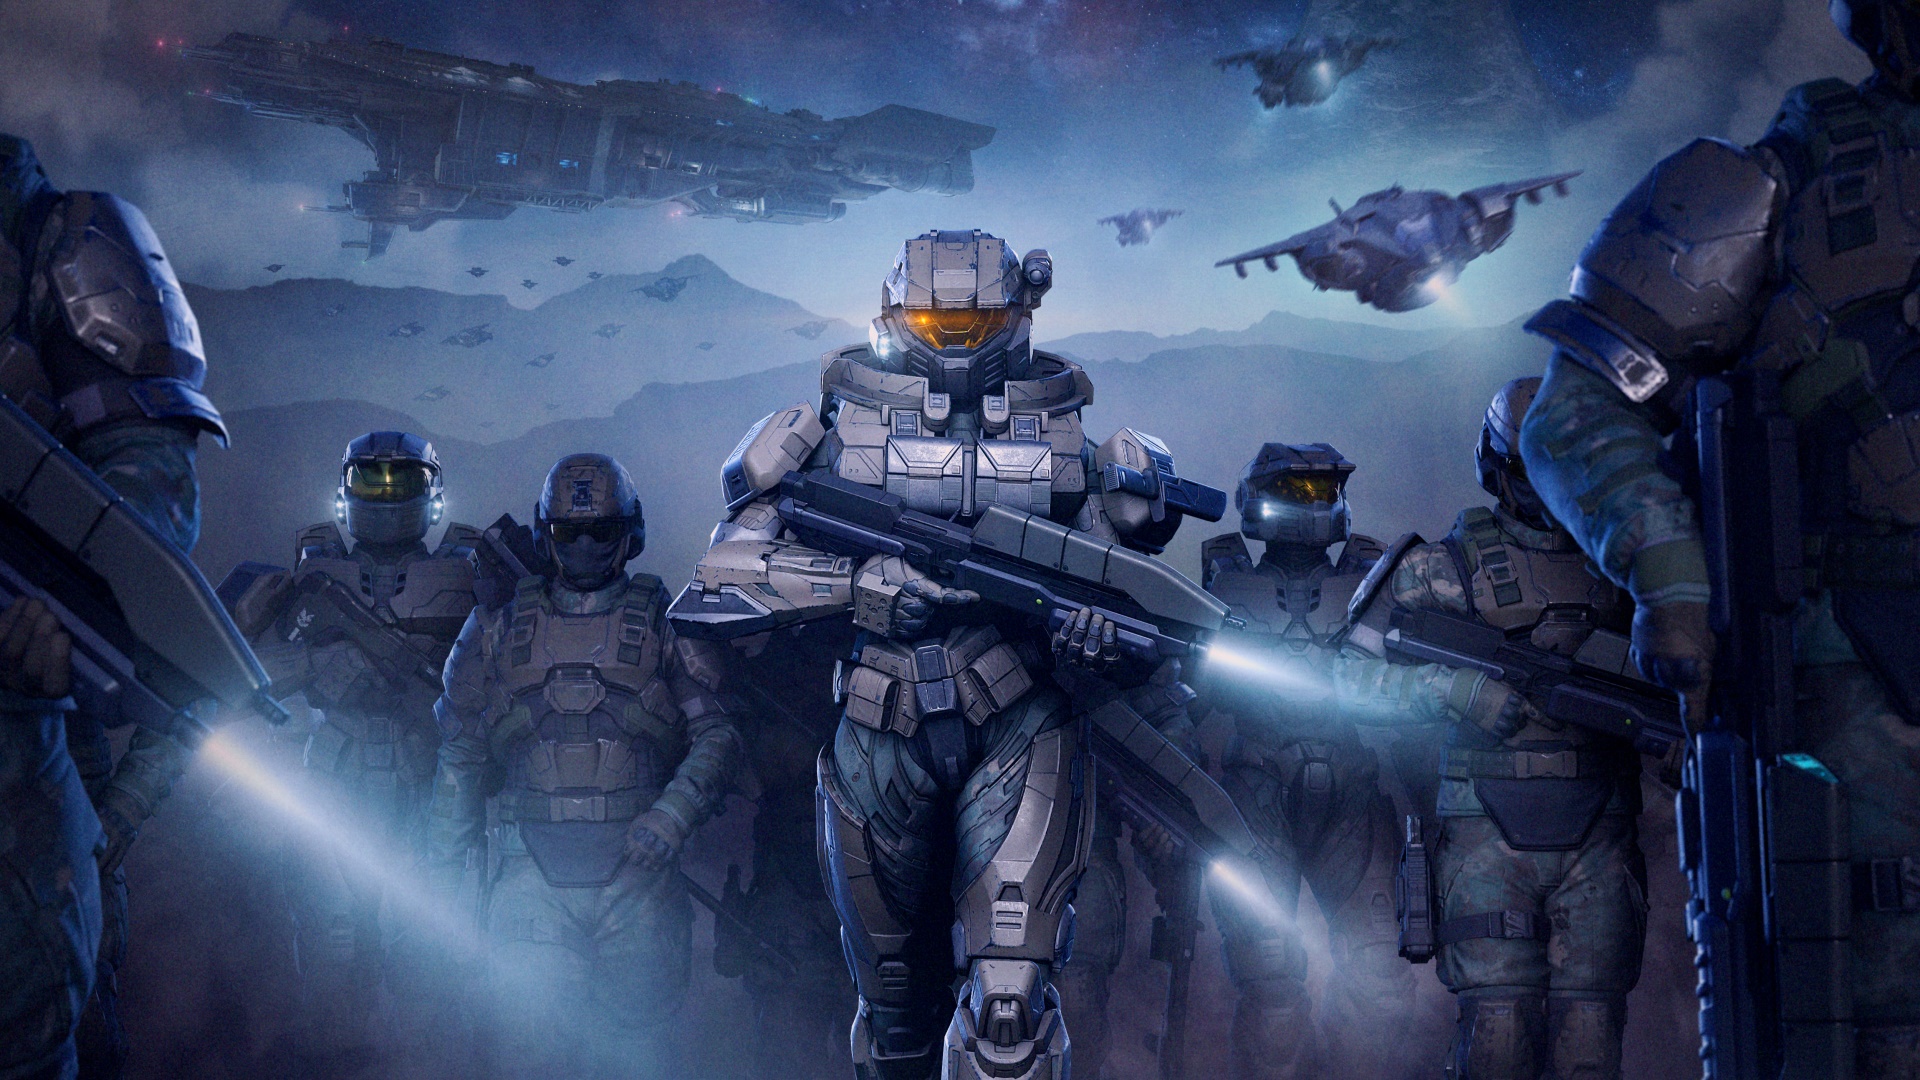 Halo Infinite key art for the Spirit of Fire Operation